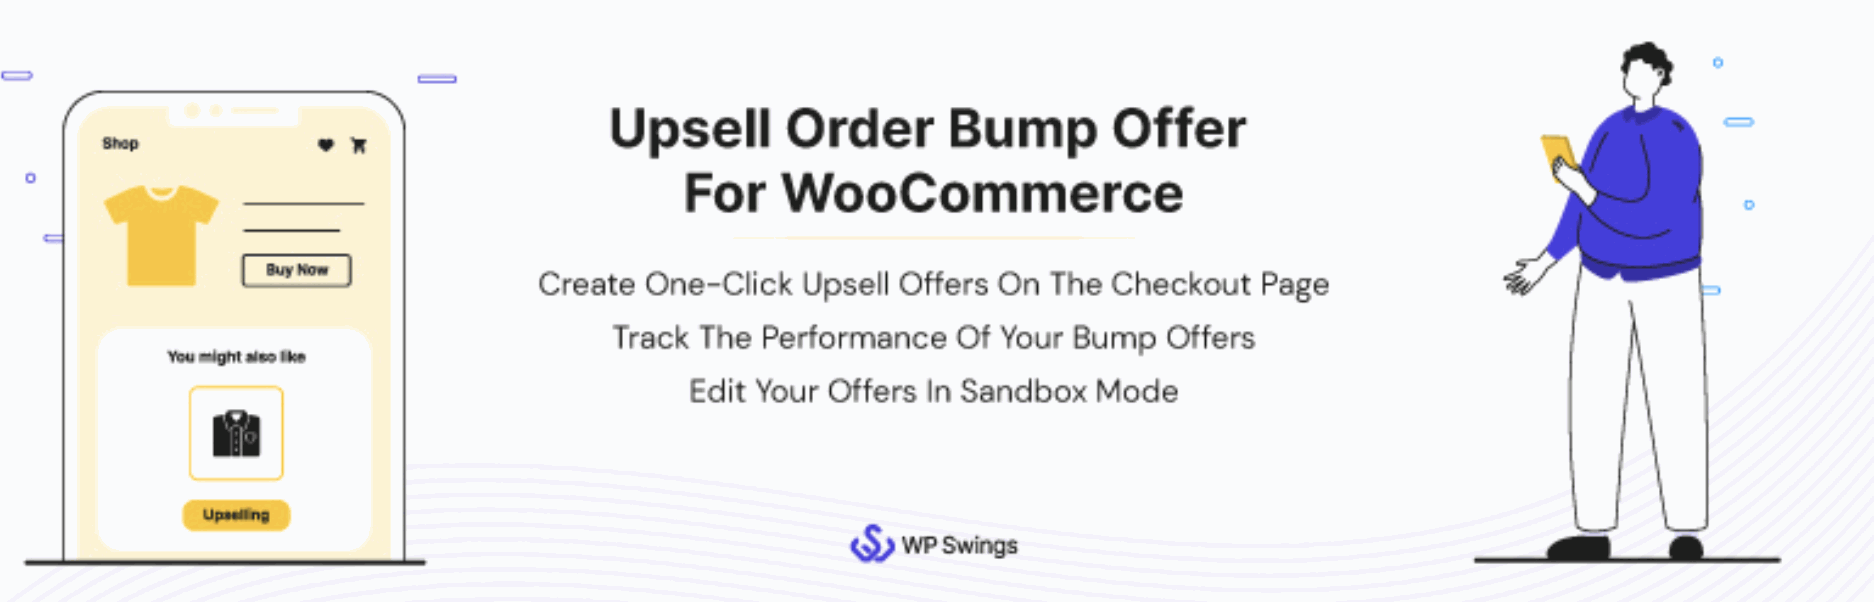 Upsell Order Bump Offer for WooCommerce